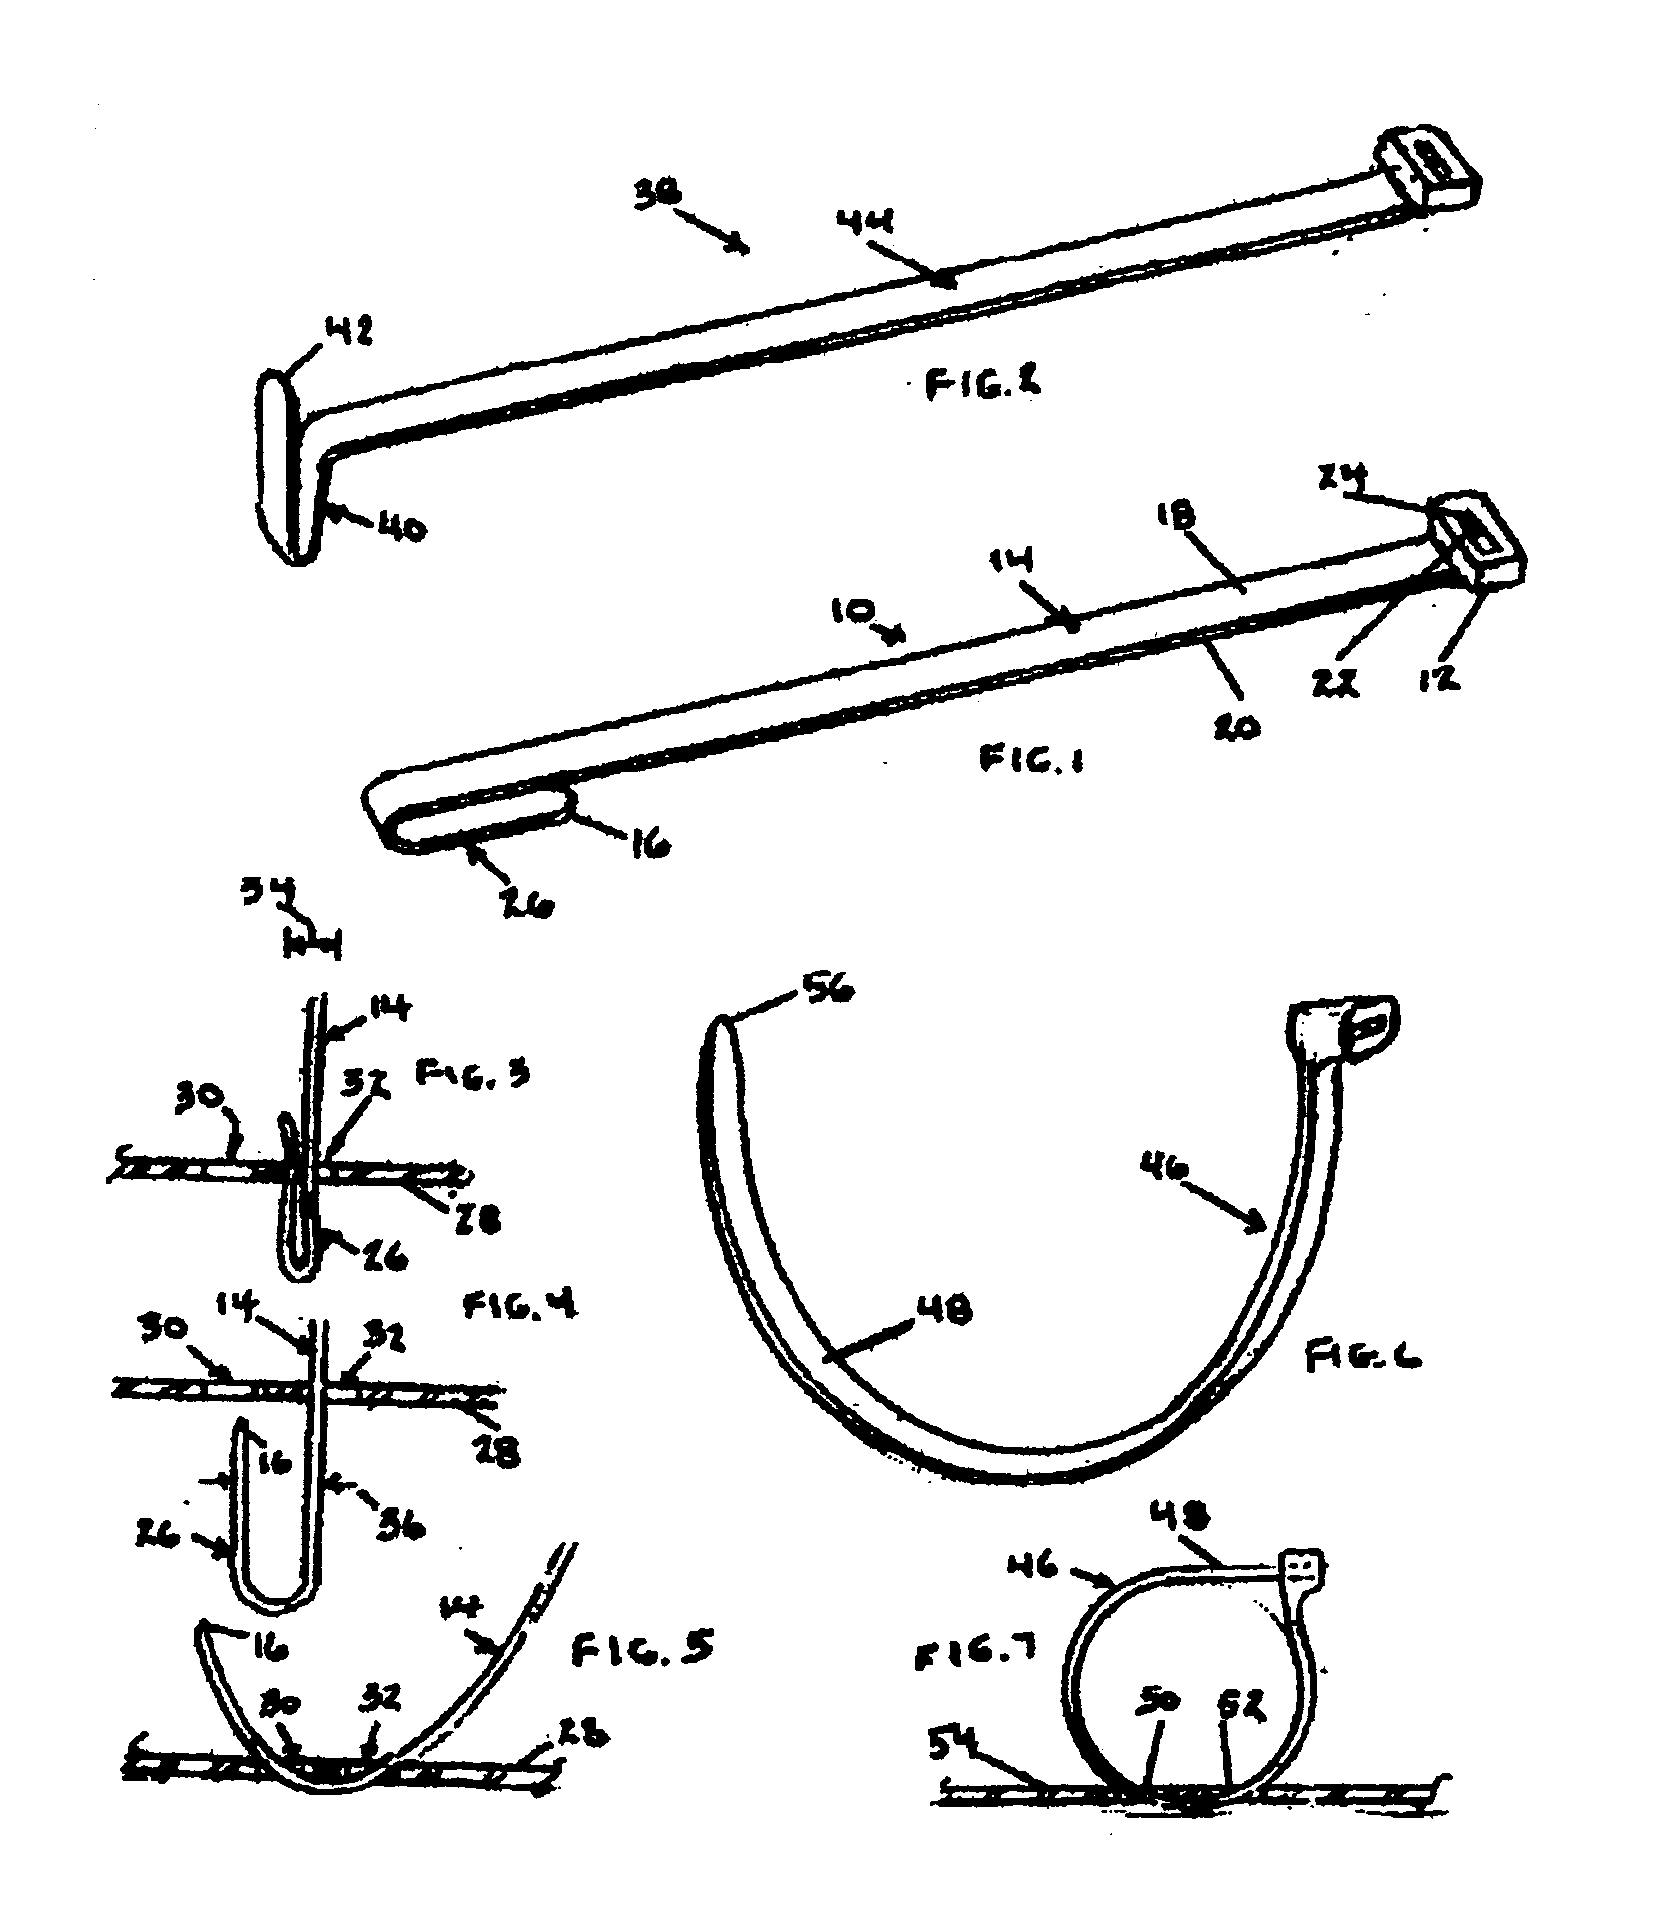 Cable ties having innate connection compatibility with mounting plates